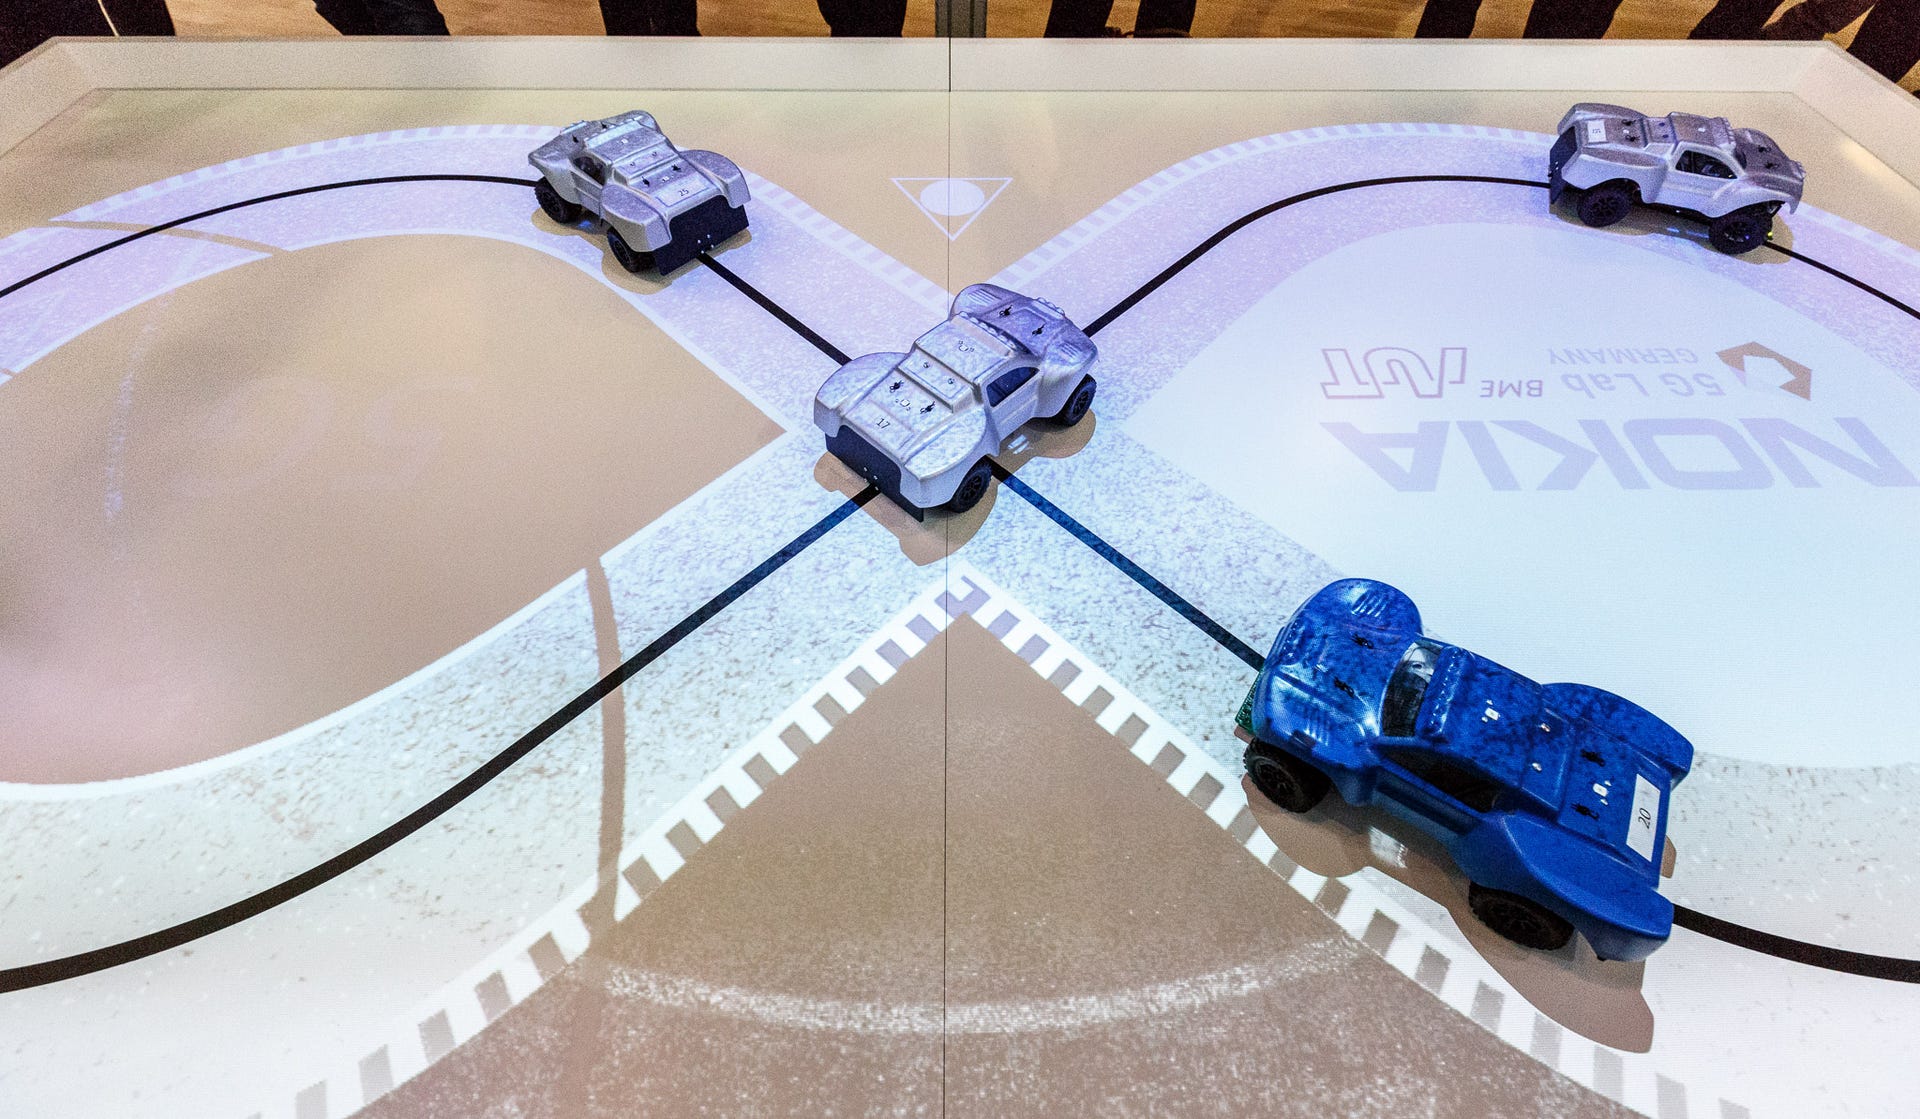 Nokia​ demonstrates how 5G networks are fast enough to coordinate toy cars whizzing through an intersection without colliding.